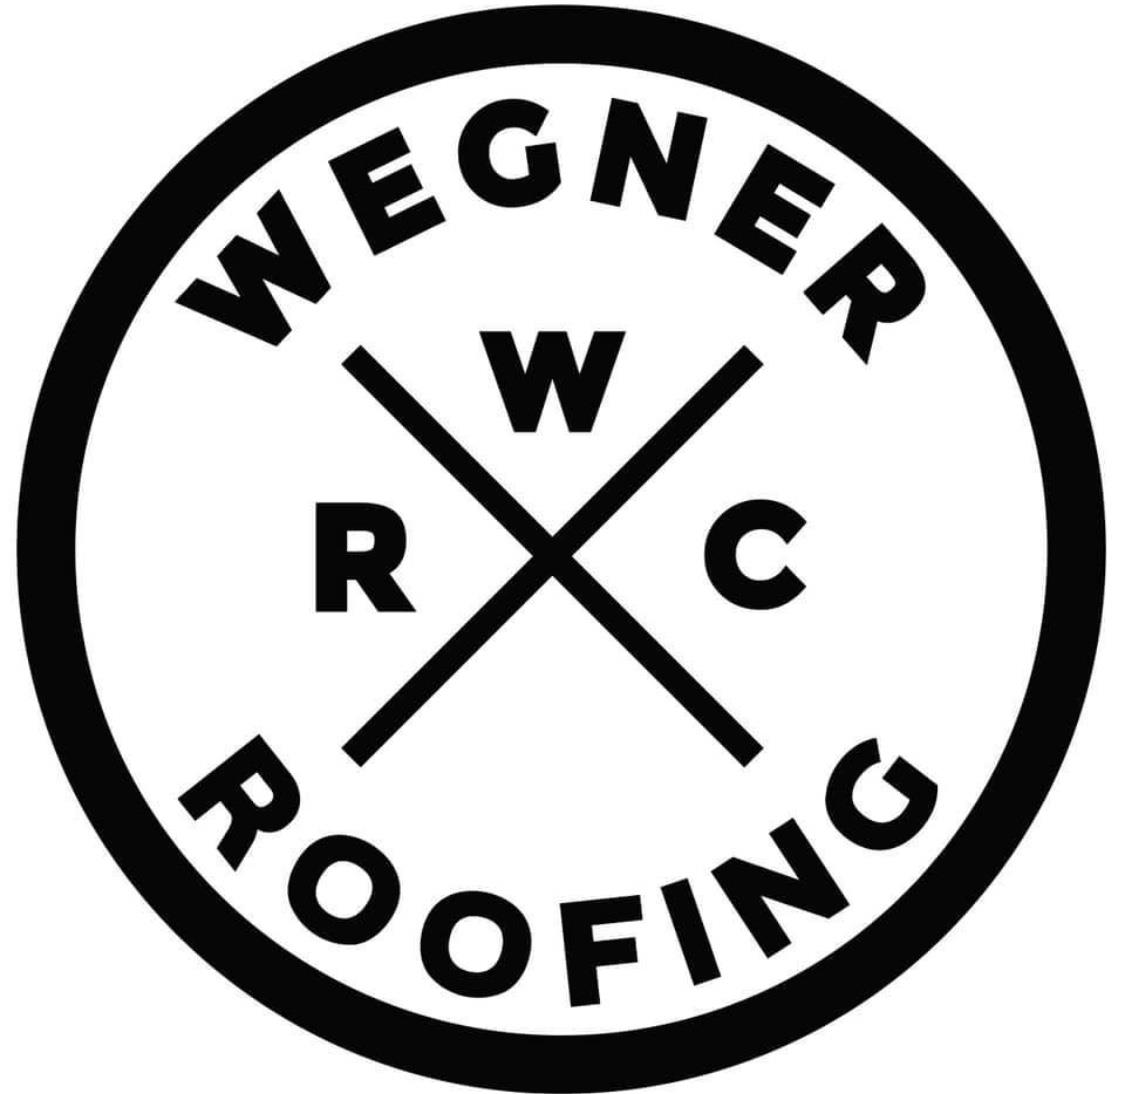 Wegner Roofing & Solar Is The #1 Roofers In Rapid City